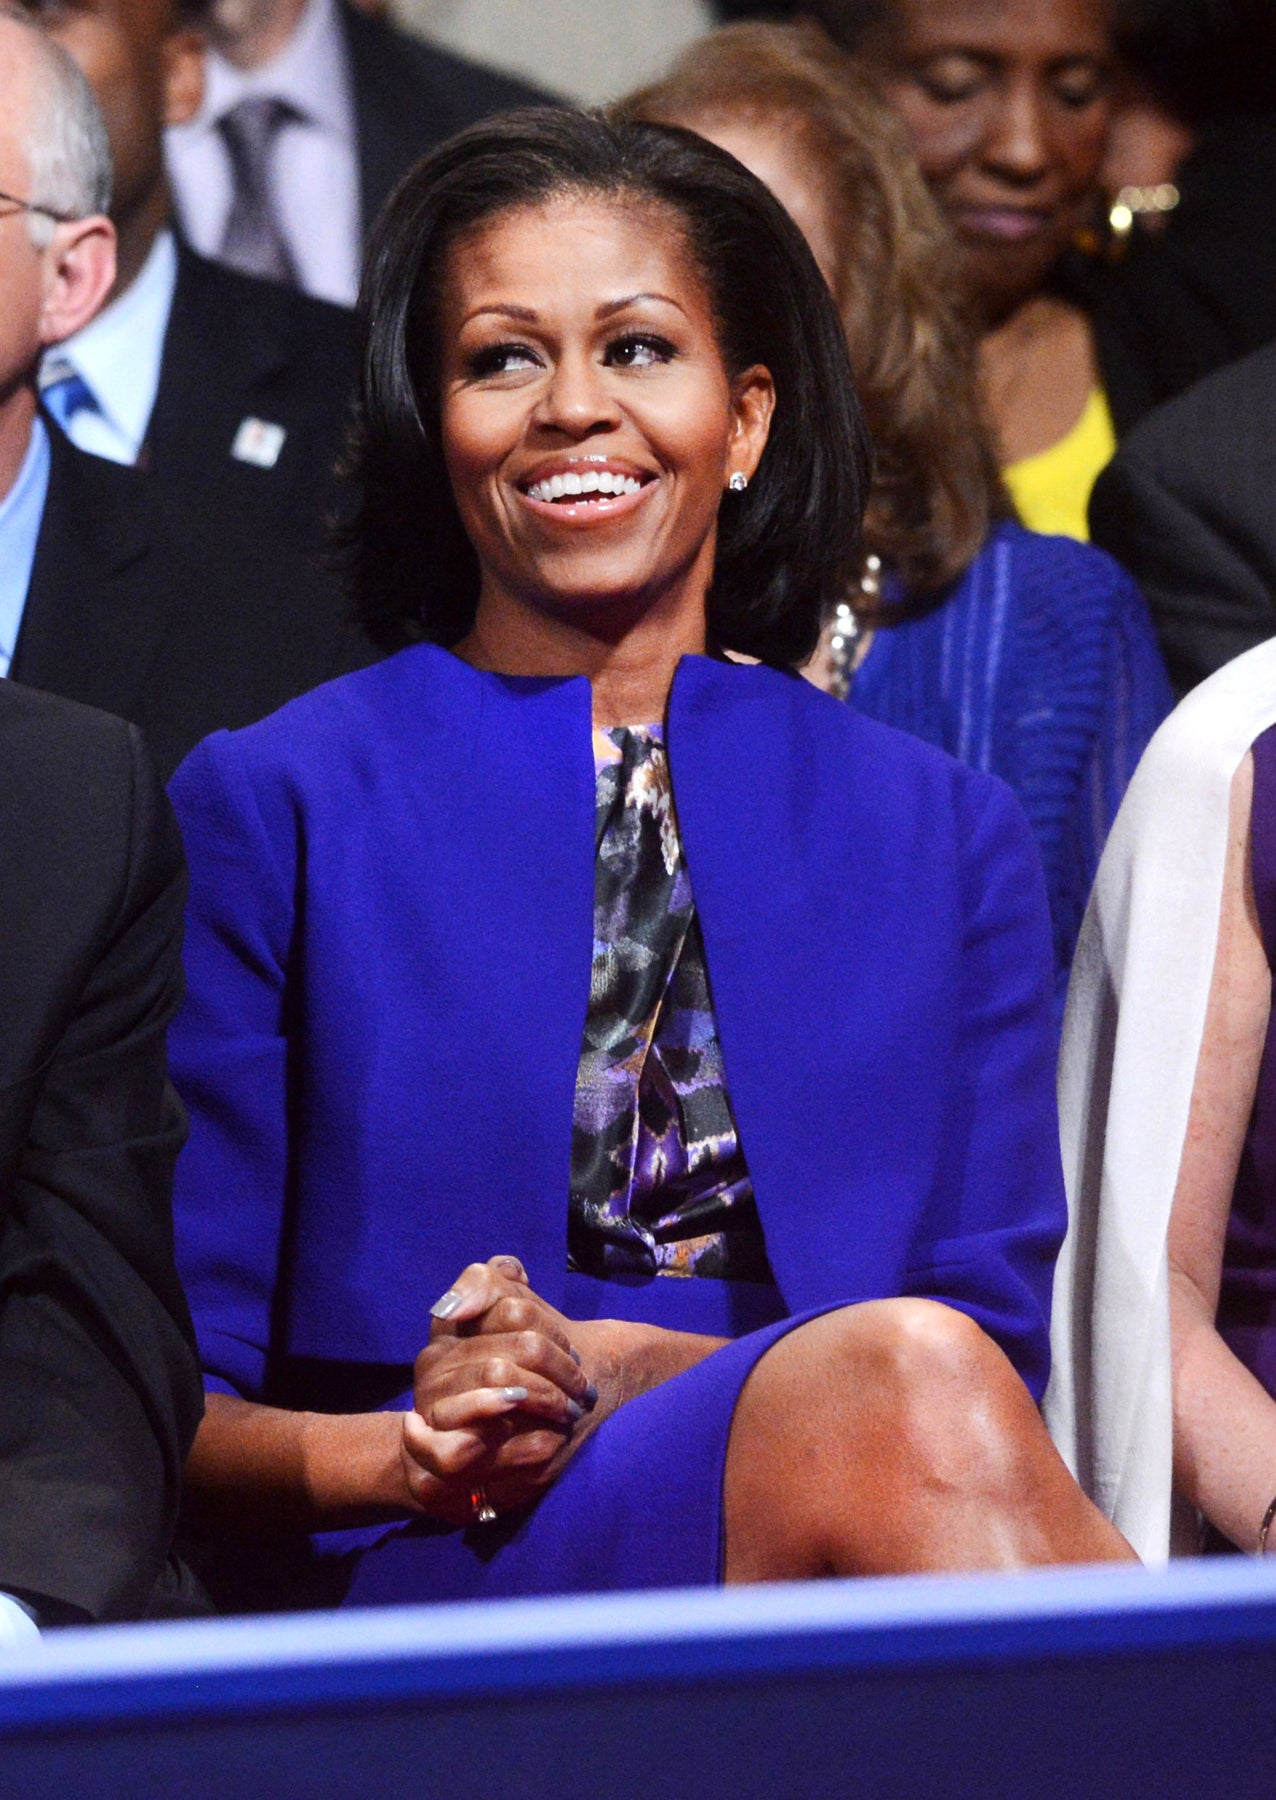 Michelle Obama Pens Open Letter to Women